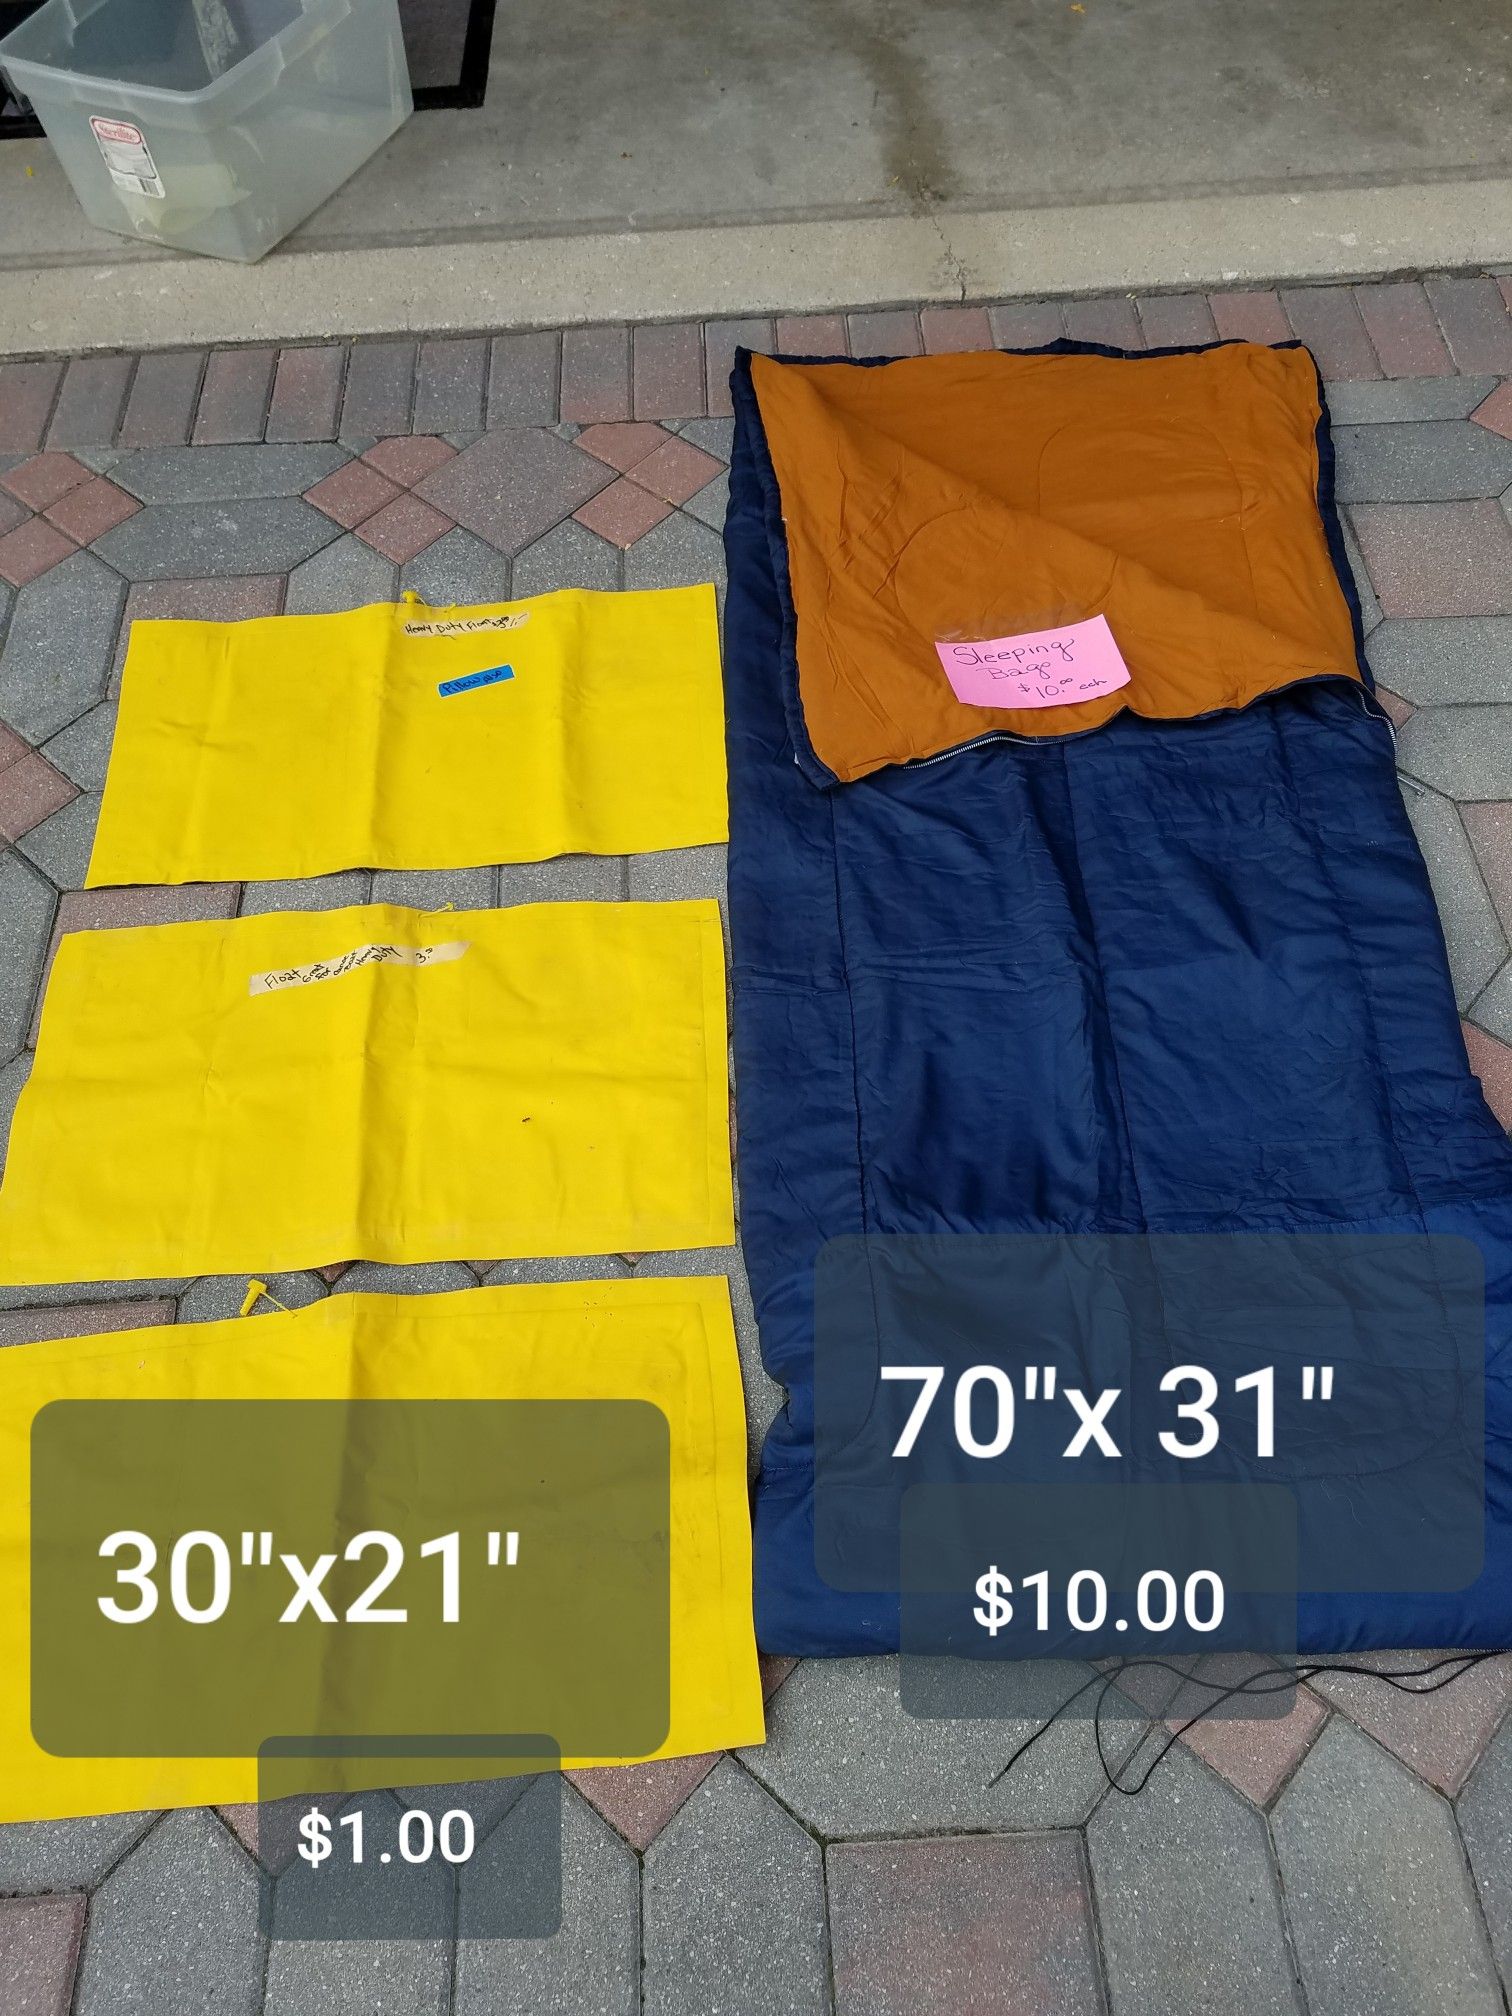 Sleeping bag 70"x31" 3 inflatable pillows that also can be used on a boat floating device